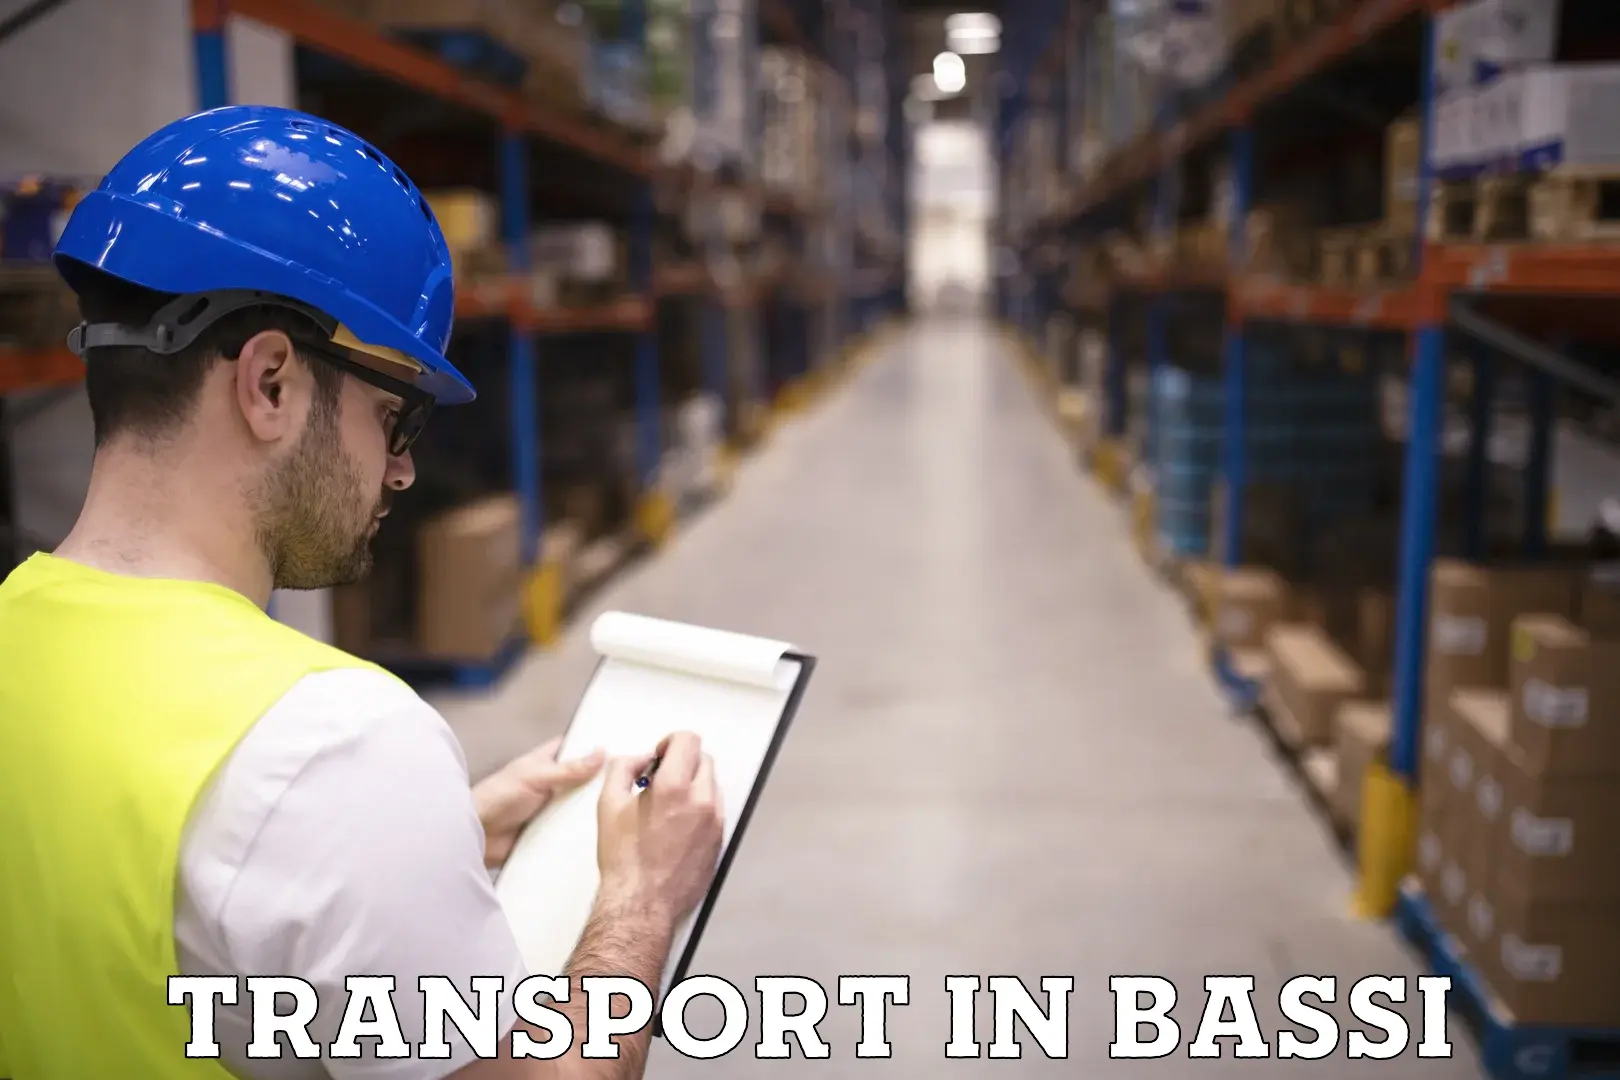 Transportation services in Bassi